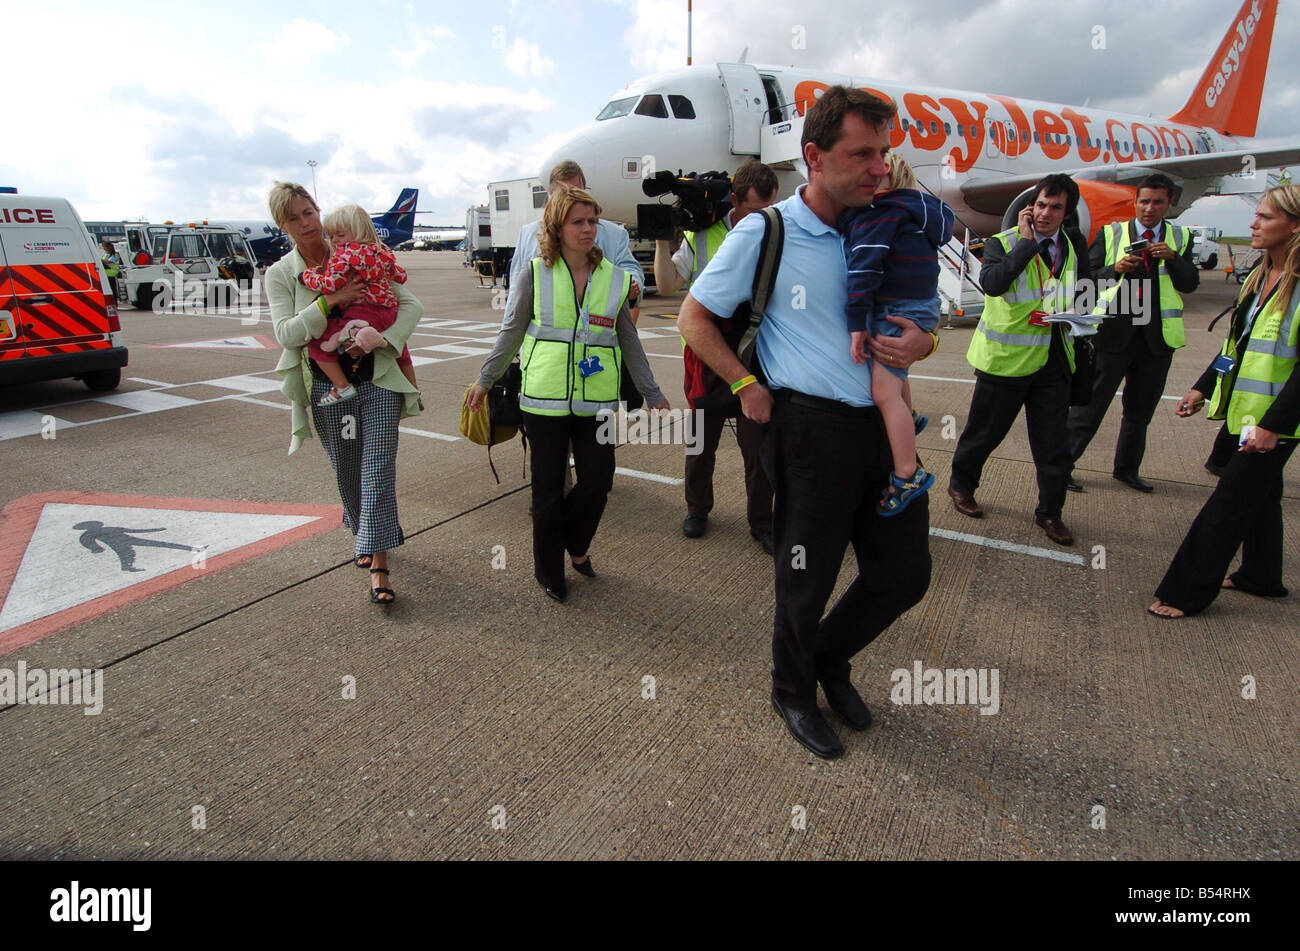 Kate and Gerry McCann arrive back at East Midlands airport with two year old twins Sean and Amelie after spending four months in Portugal looking for missing daughter Madeleine McCann 09 09 2007 Stock Photo